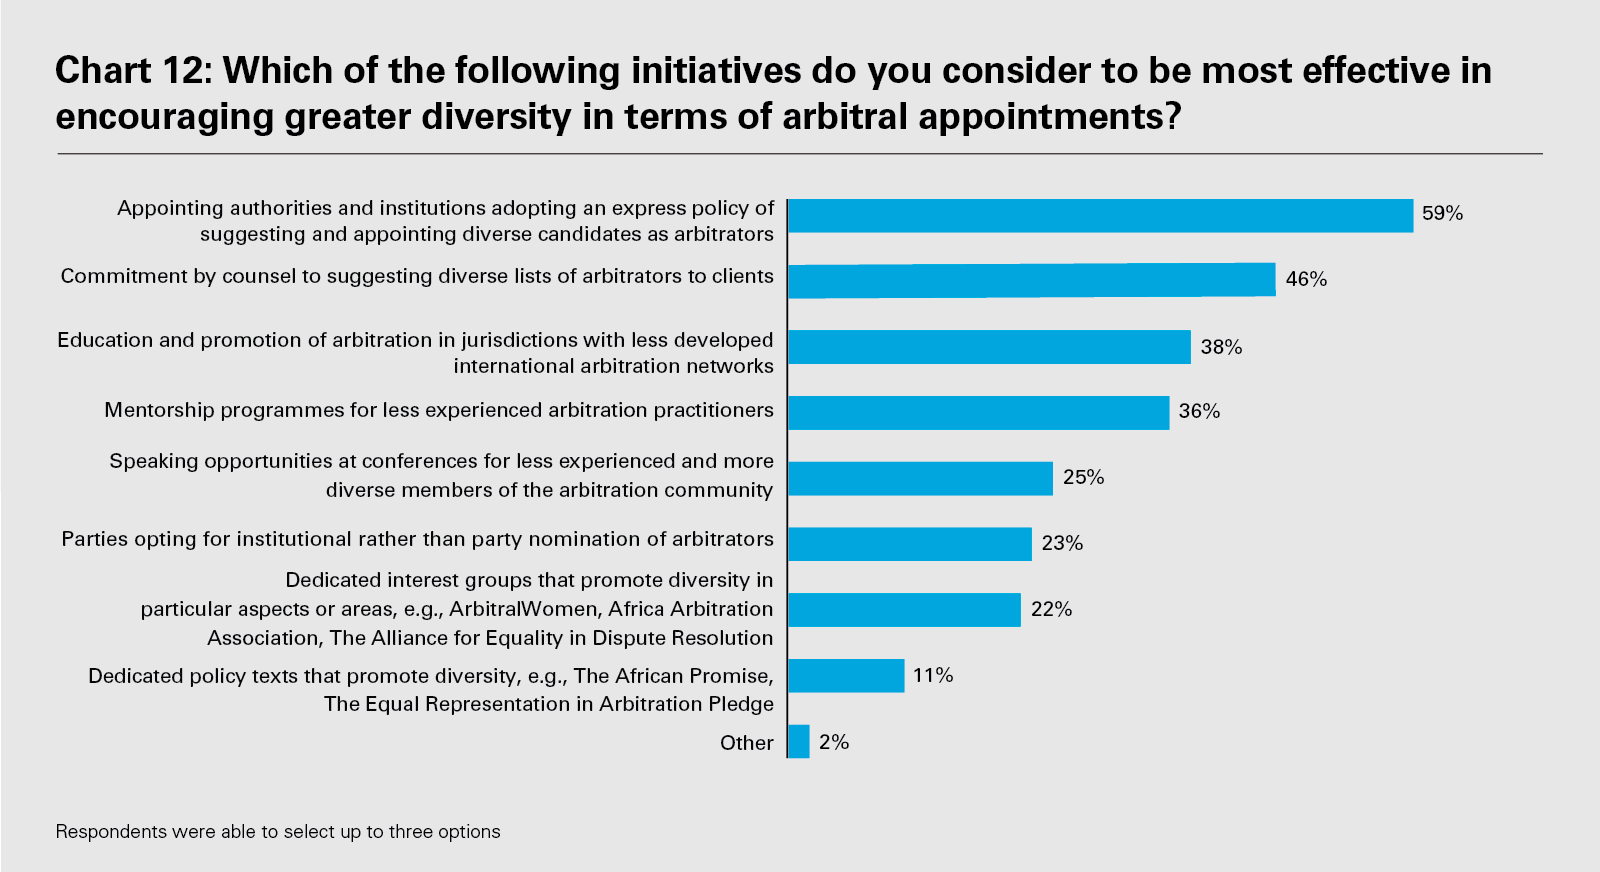 Chart 12: Which of the following initiatives do you consider to be most effective in encouraging greater diversity in terms of arbitral appointments? (PDF)